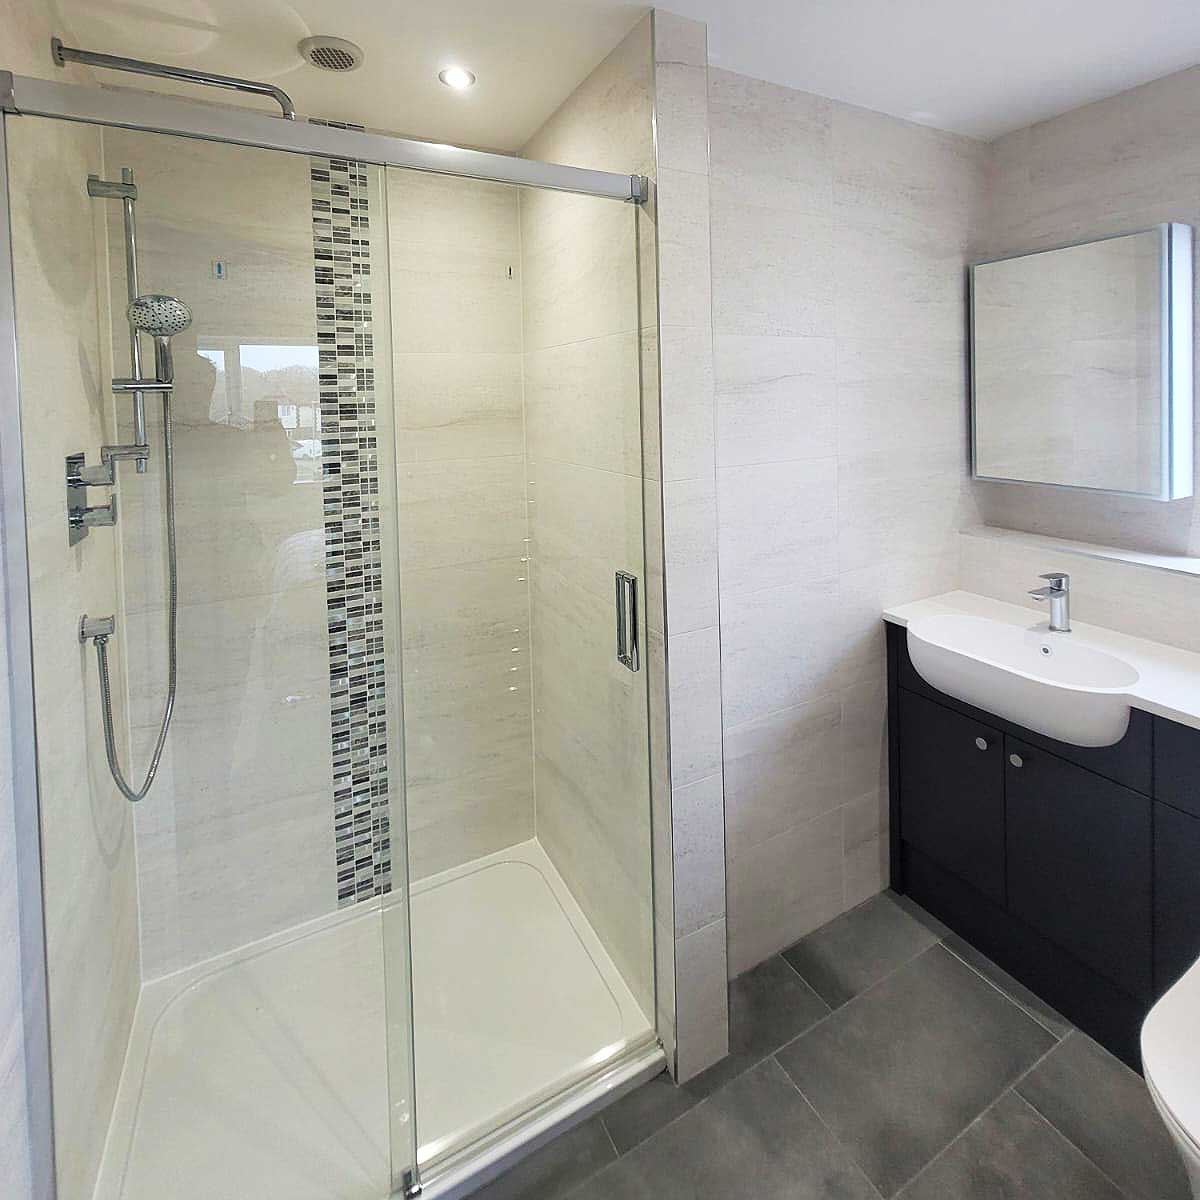 The new enlarged shower created by Room H2o for a customer in Dorset now features a hand shower and large drench shower head